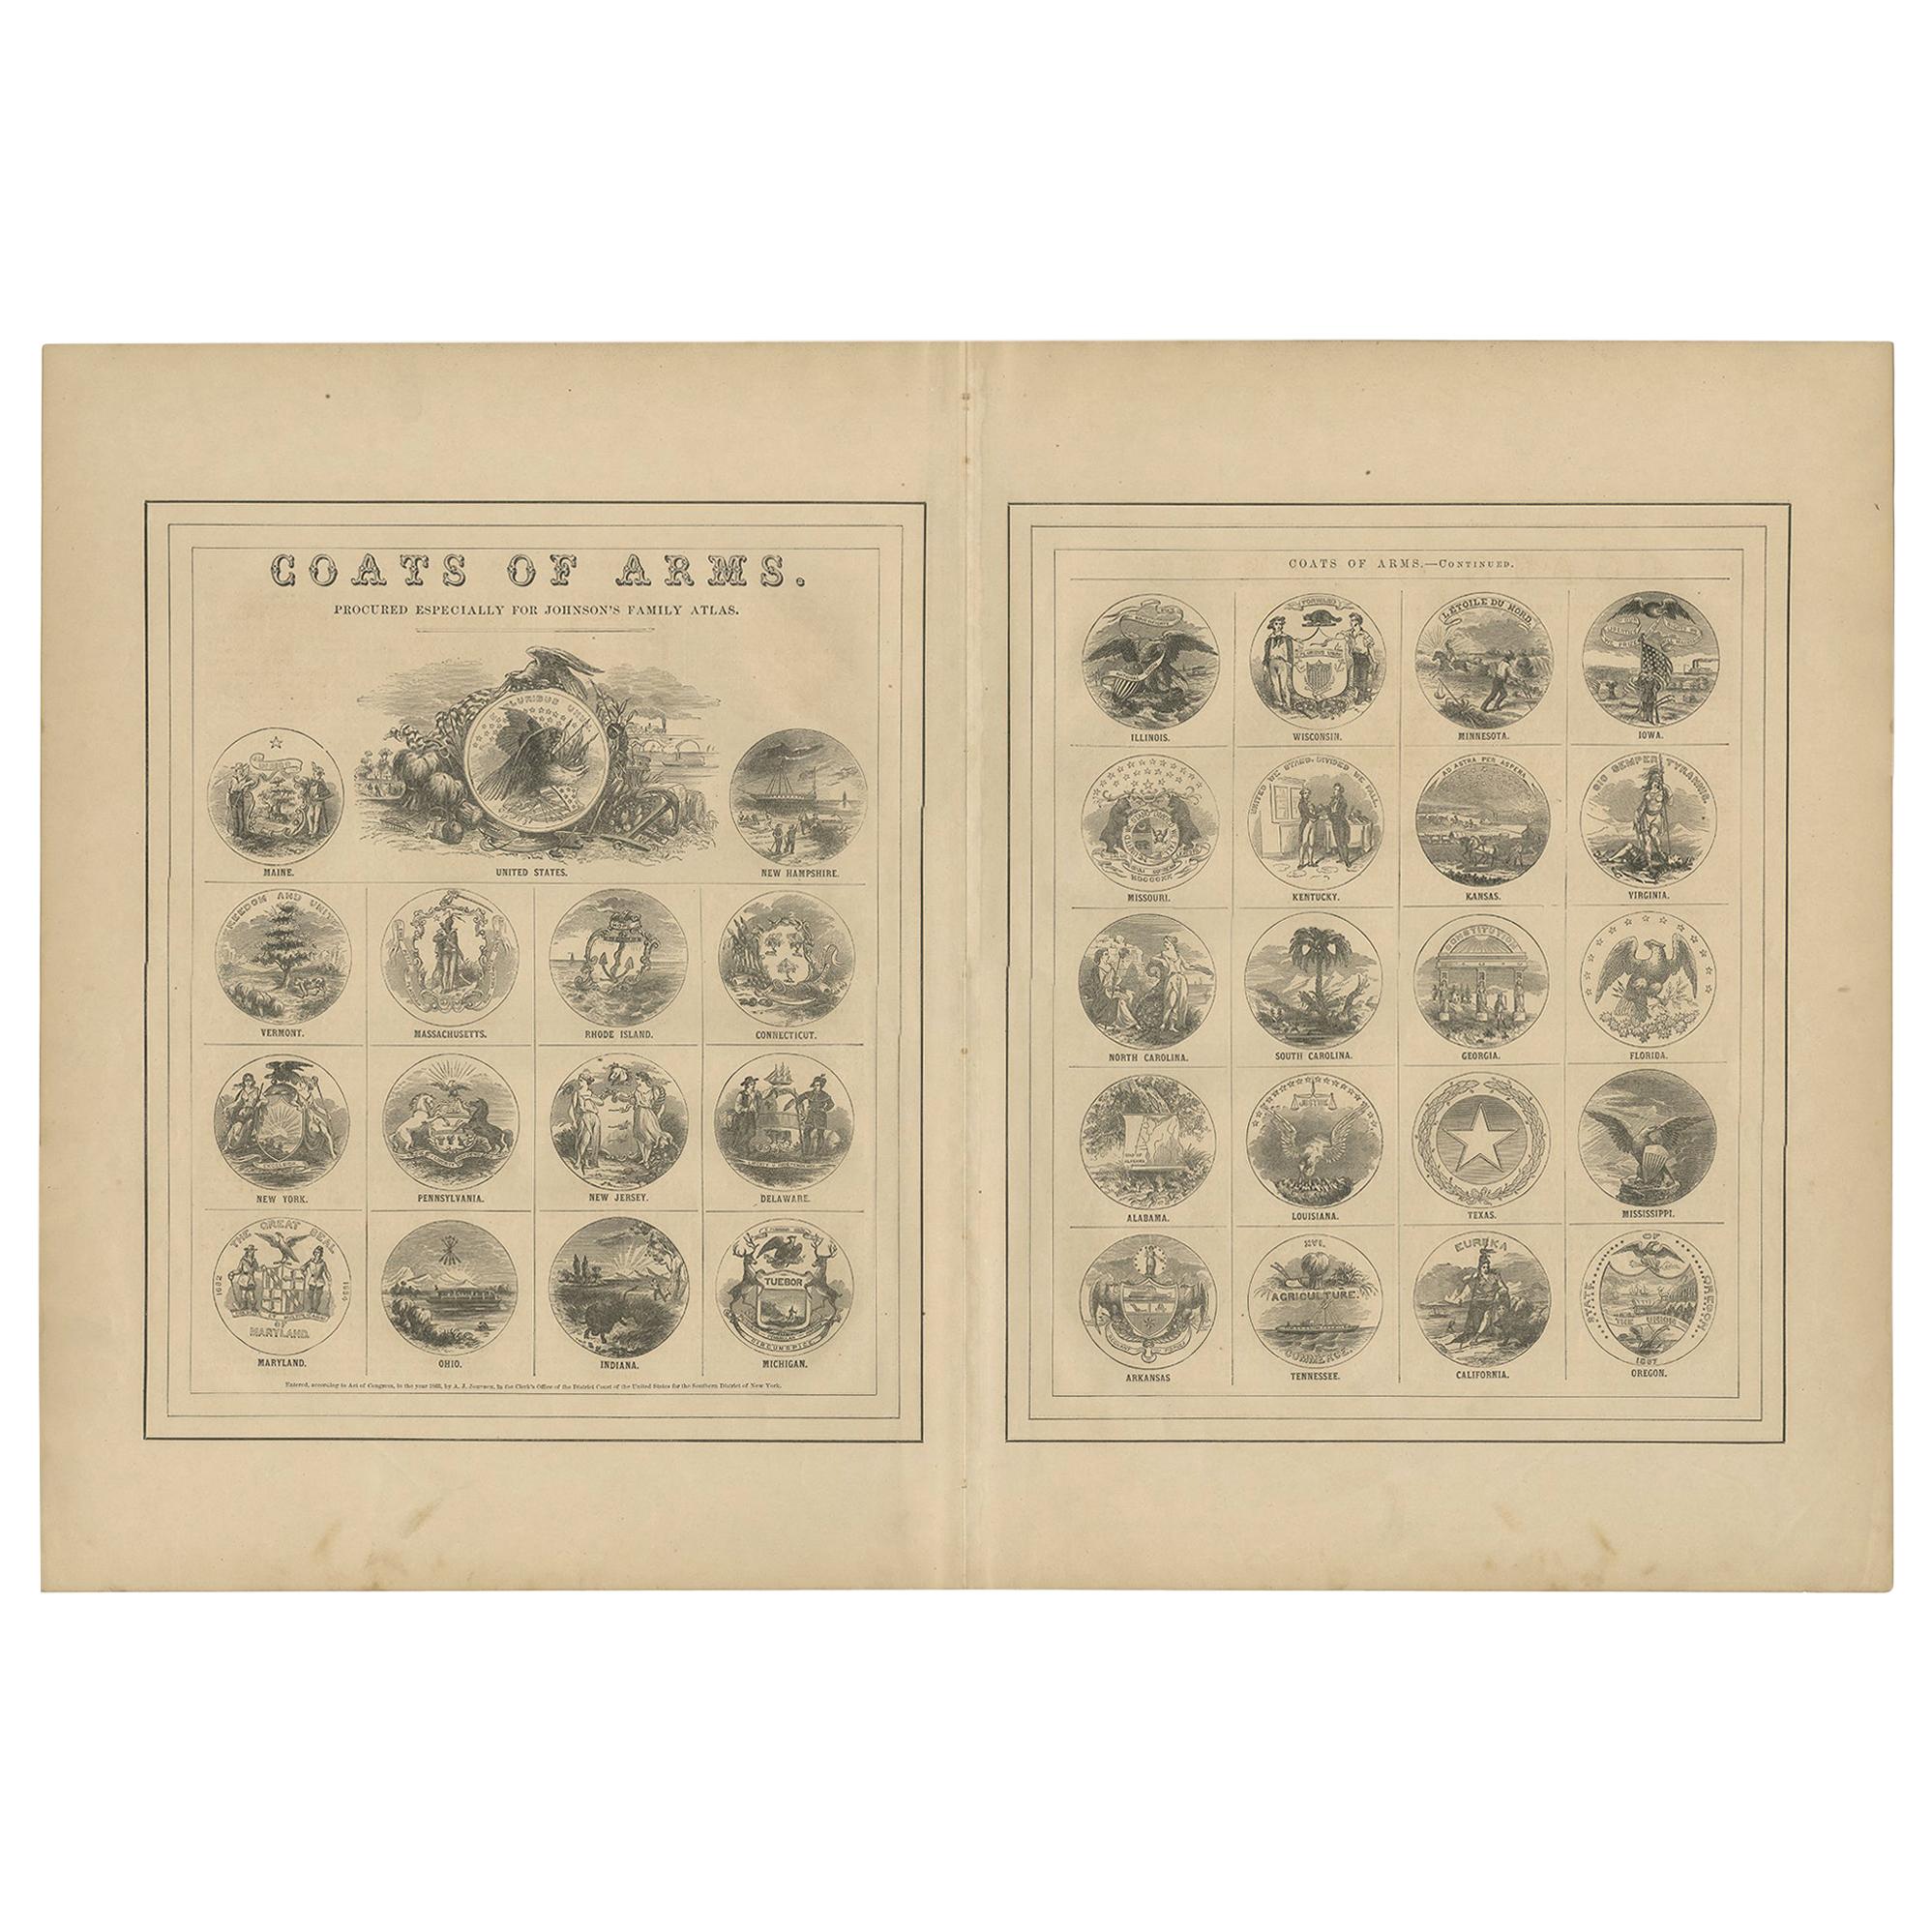 Antique Print of the United States Coats of Arms by Johnson, 1872